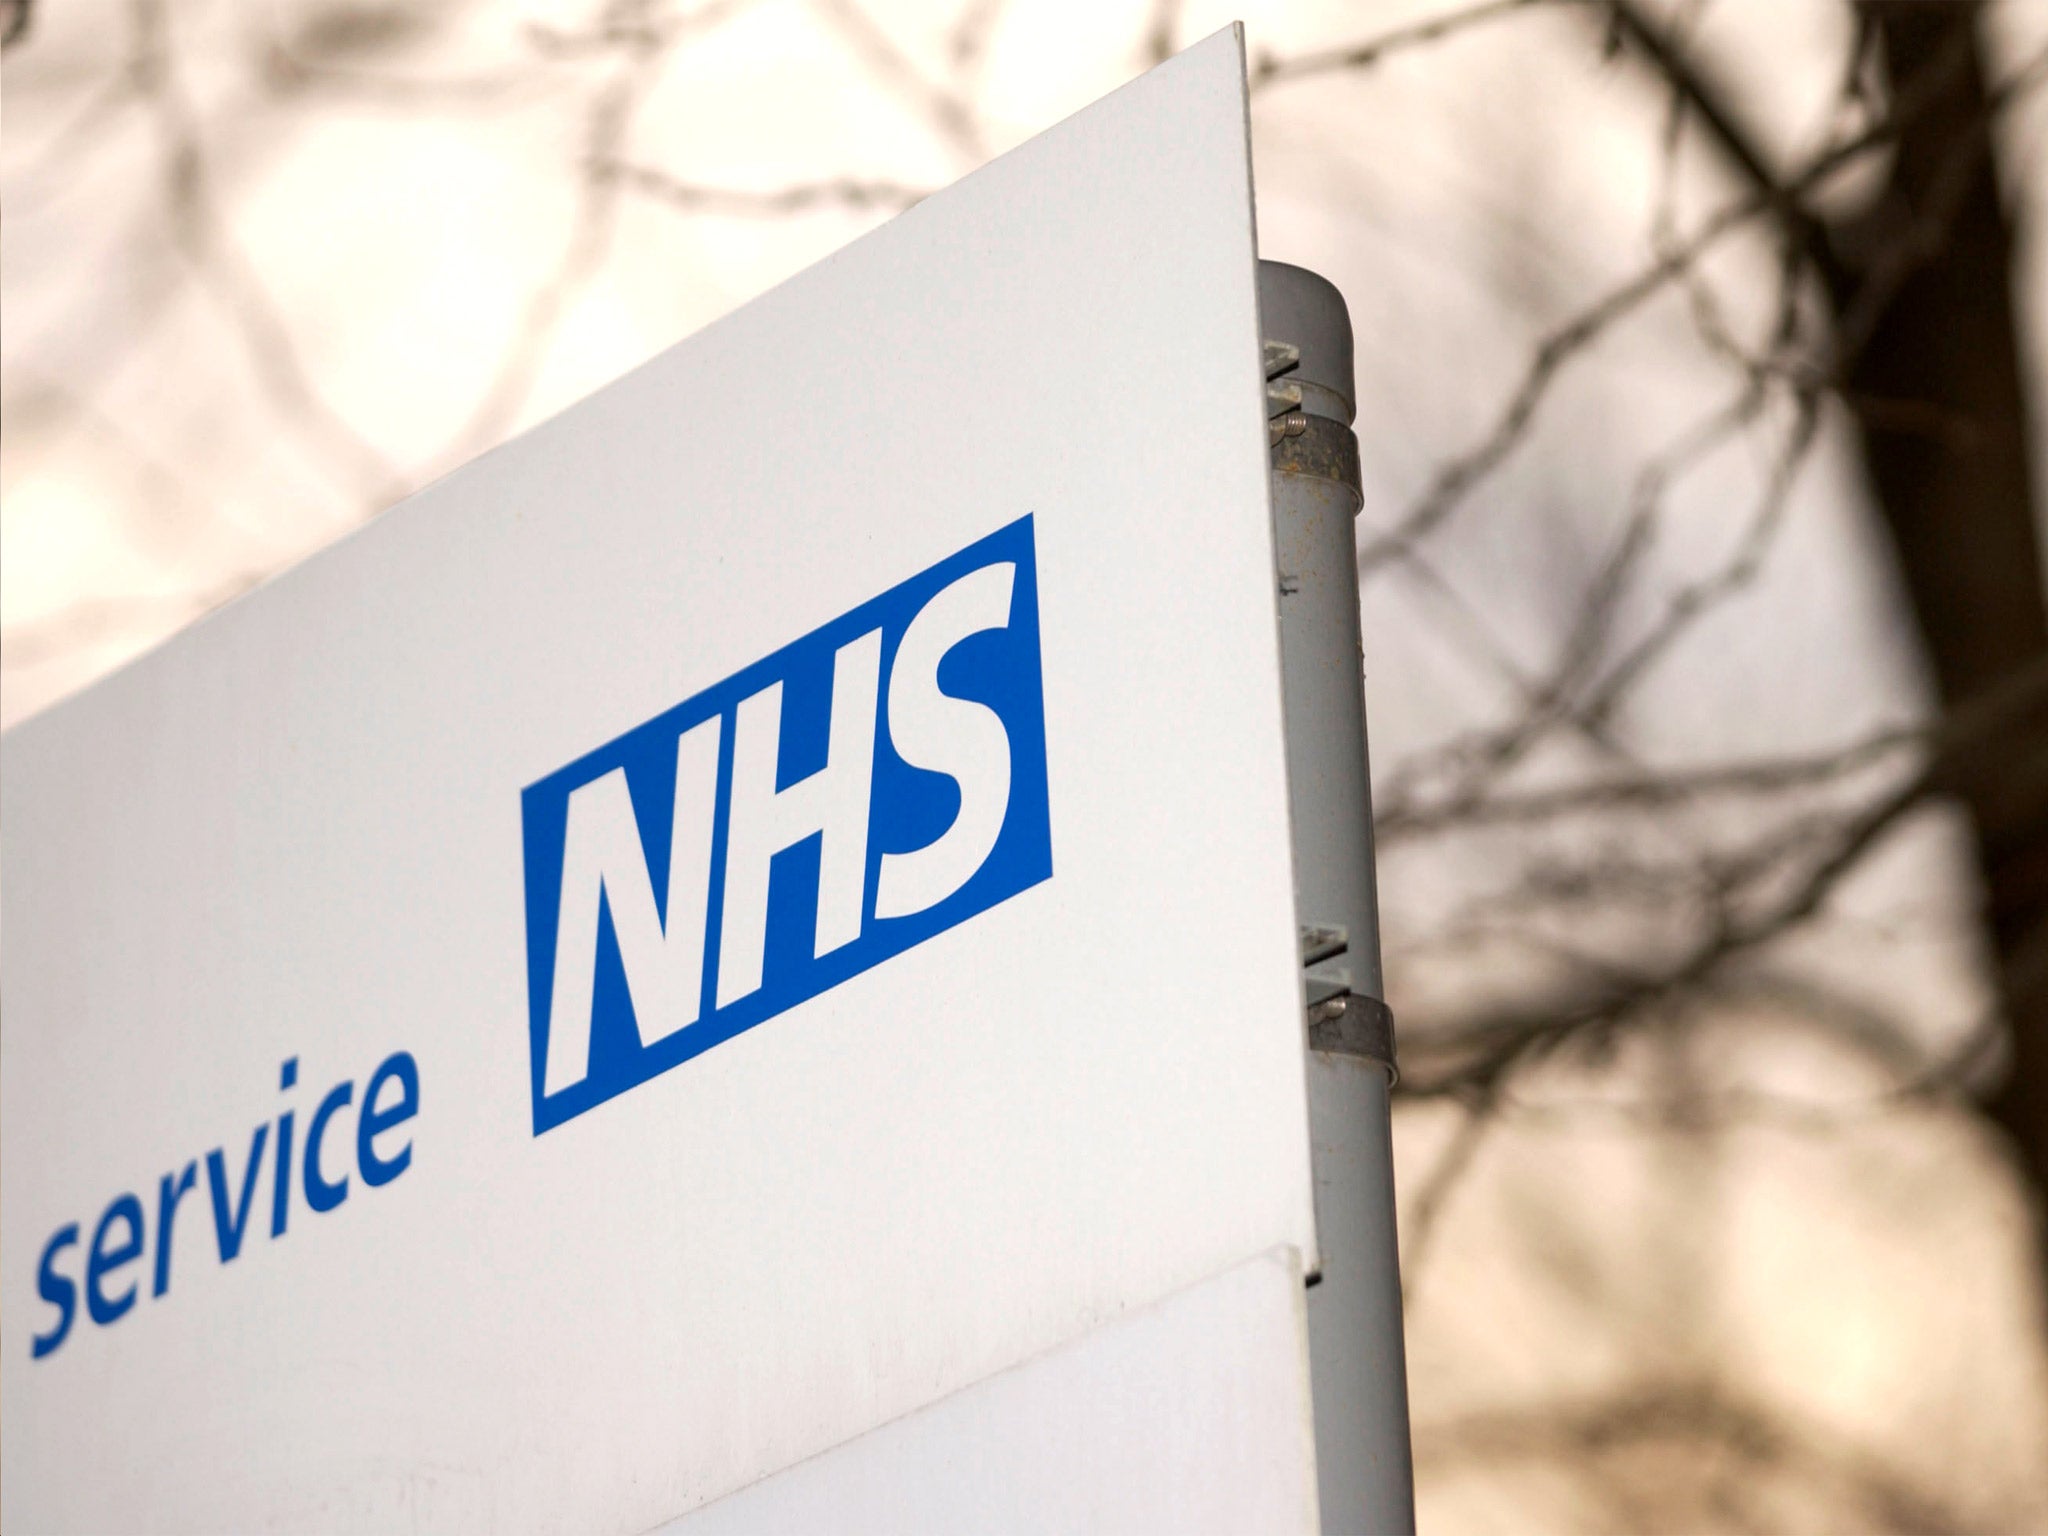 NHS finances worsened in the 2013-14 financial year